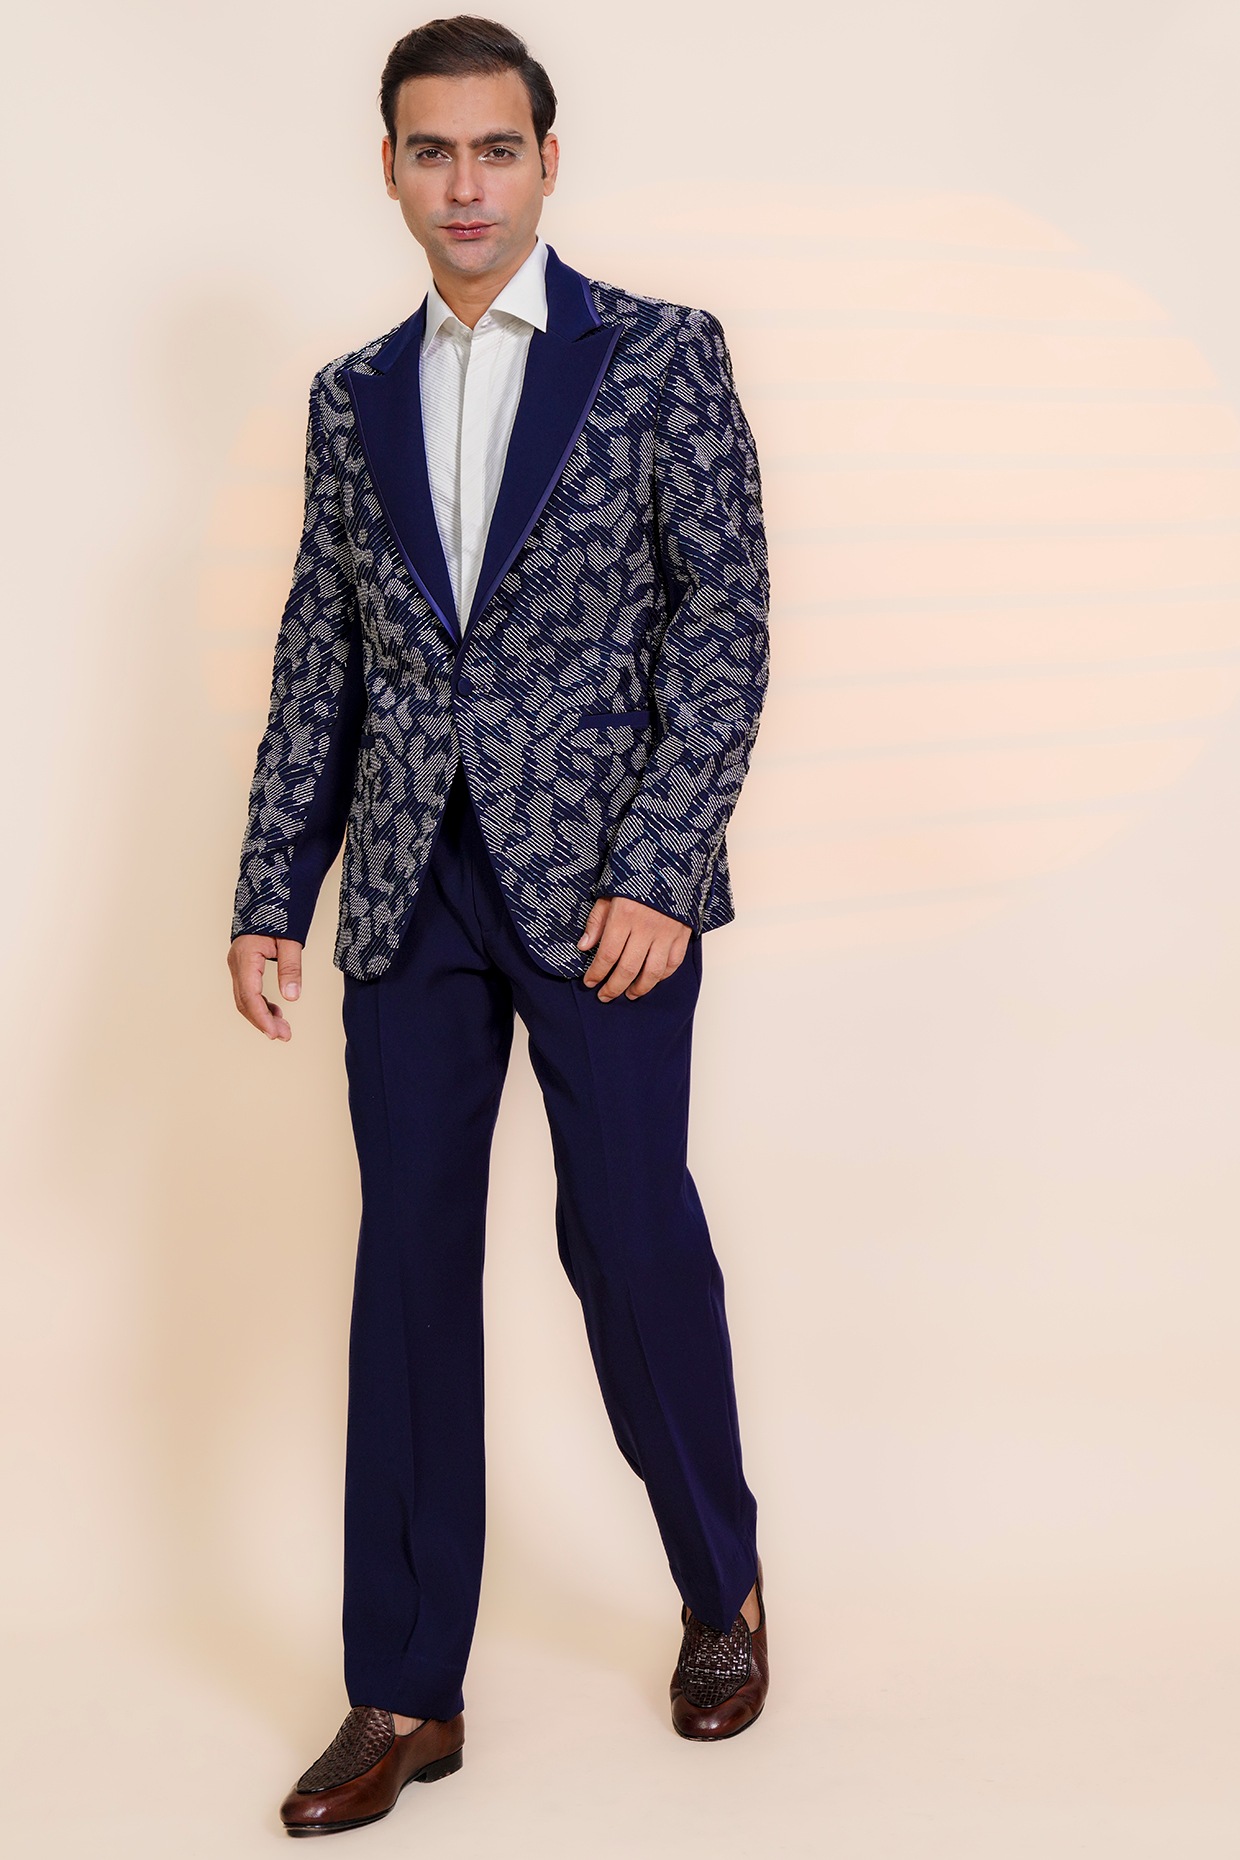 Southwick Suit - Super 100s Wool Serge - Navy with Sky Blue Stripe - Men's  Clothing, Traditional Natural shouldered clothing, preppy apparel